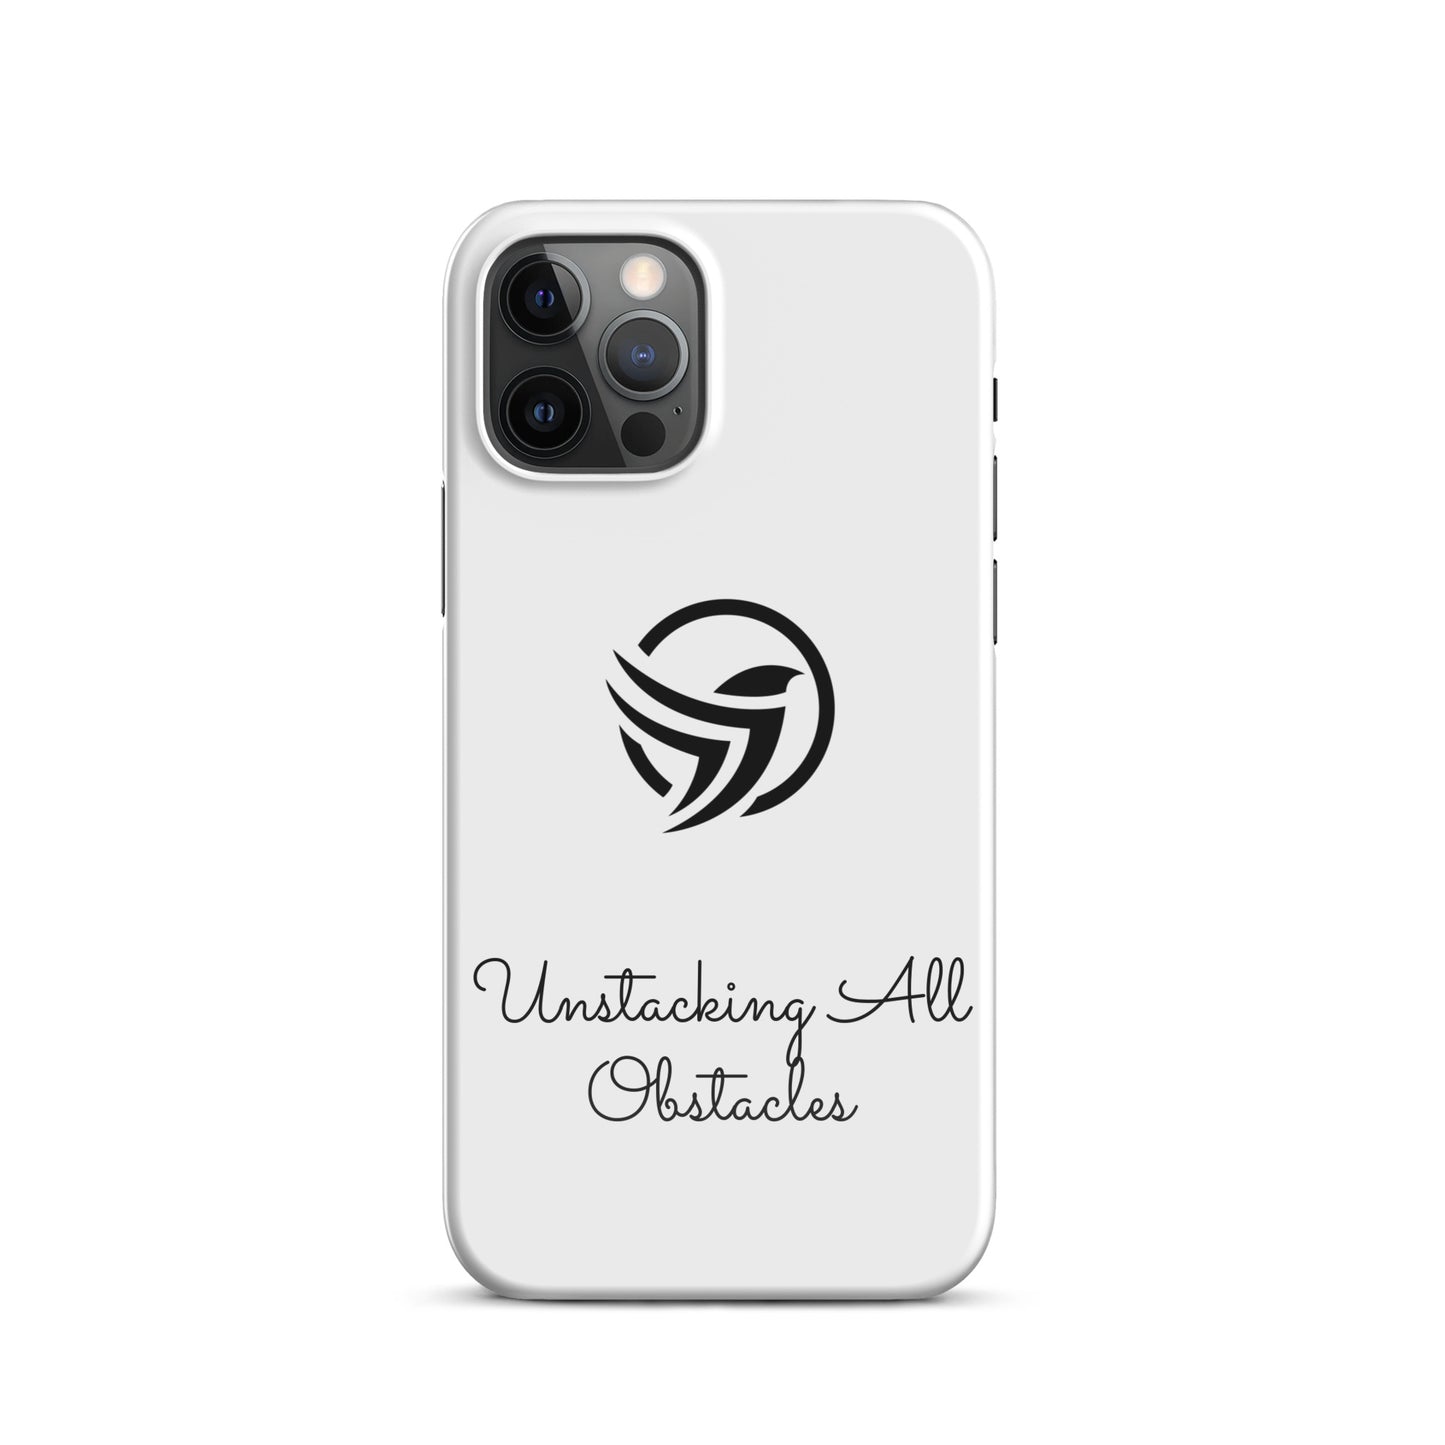 Unstacking All Obstacles Snap case for iPhone®